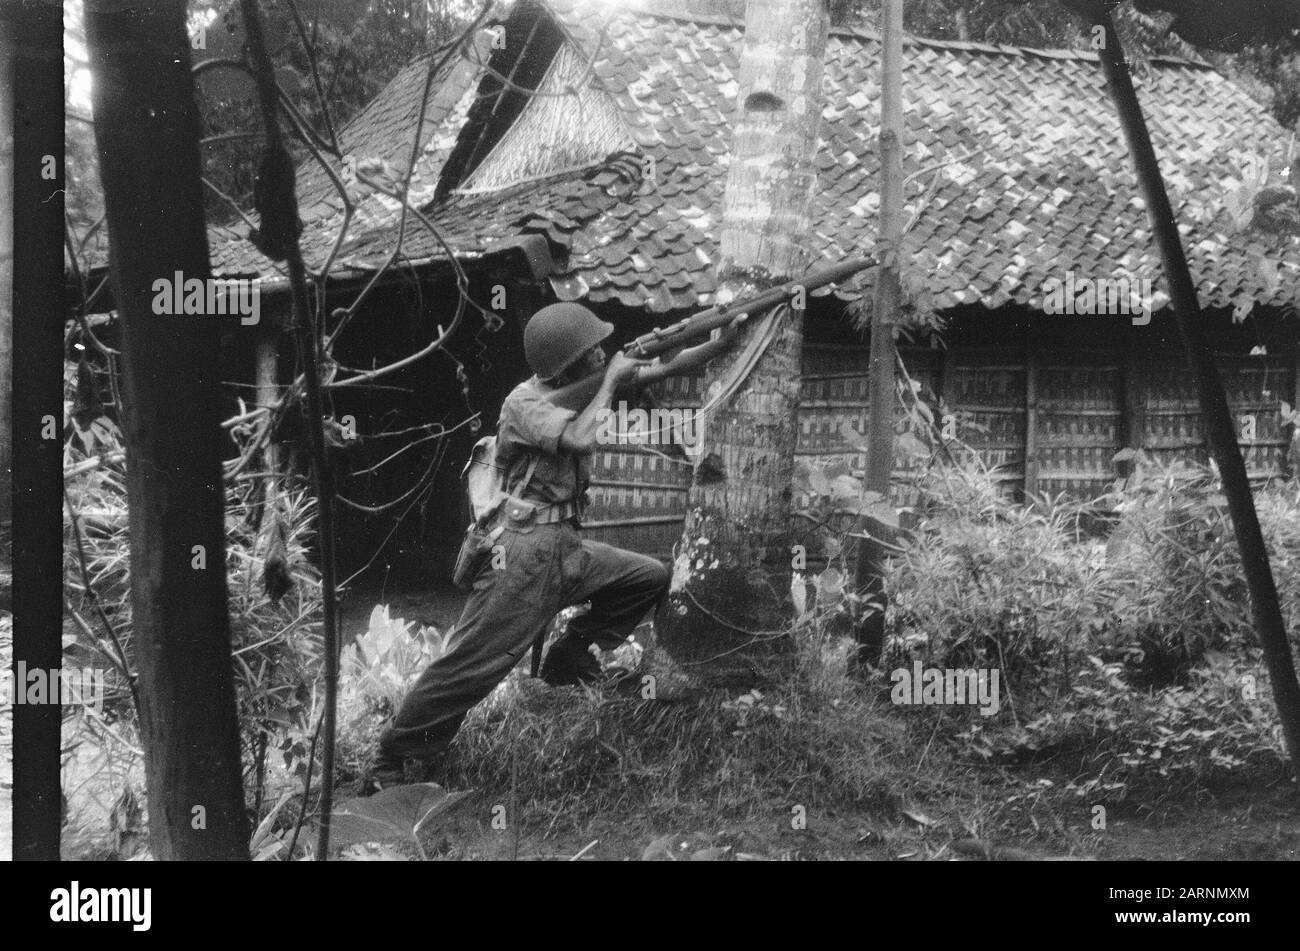 Action of the V-Brigade, Gadja Merah [the Red Elephant] in Bekal and surroundings  [A KNIL military has pointed his rifle up, along the trunk of a tree. Behind him a house] Date: 30 March 1949 Location: Bekal, Indonesia, Dutch East Indies Stock Photo